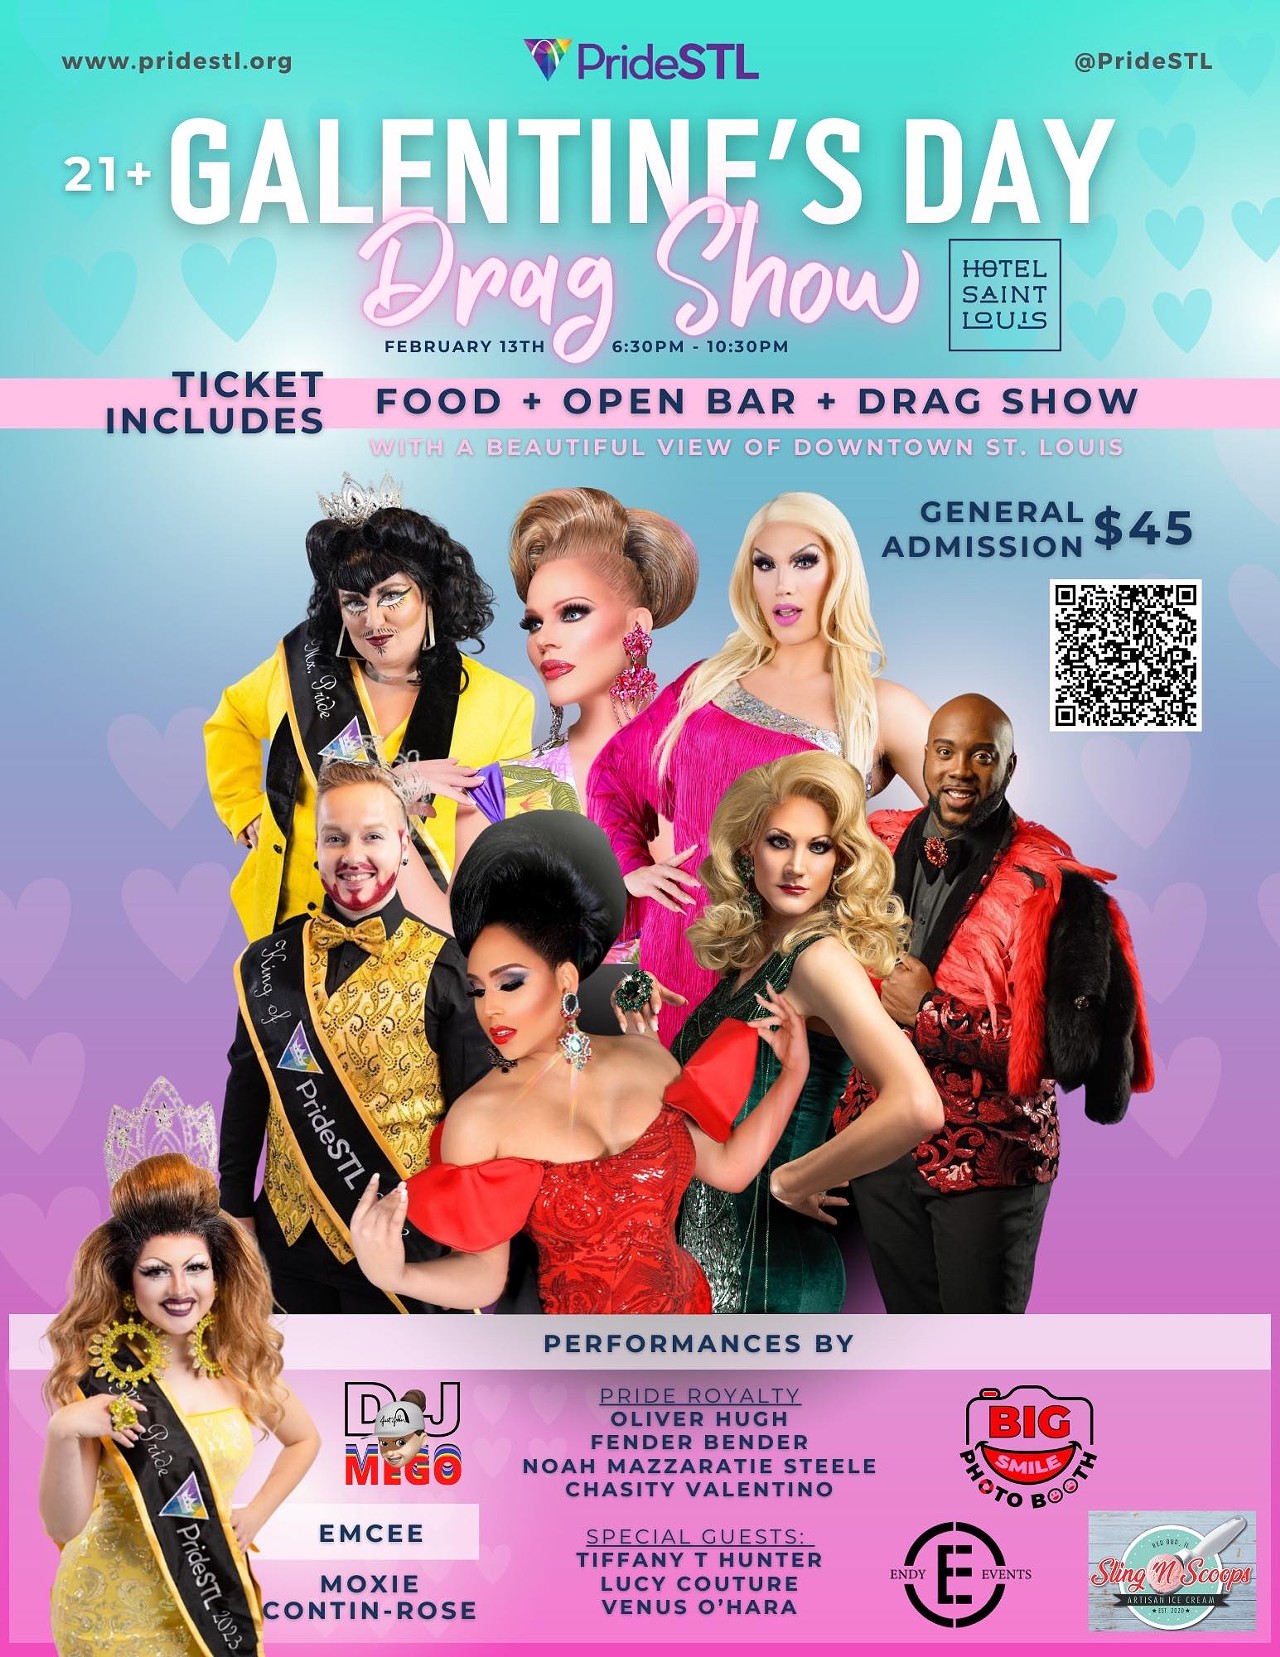 PrideSTL Galentine's Day Drag Dinner
Join PrideSTL for an unforgettable Galentine's Day Dinner Drag Show at Hotel Saint Louis (705 Olive Street) on February 13 from 6:30 to 10:30 p.m. Tickets ($45) include a full dinner buffet with salad, dinner rolls, pan-seared breast of chicken (lemon chardonnay sauce-boursin cheese), sliced London broil (mushroom red wine sauce), oven-roasted rosemary potatoes and winter vegetable medley; an open bar featuring 4 Hands and 1220 spirits; and a drag show featuring members of the current and past royalty members. Purchase tickets on the Eventeny website.